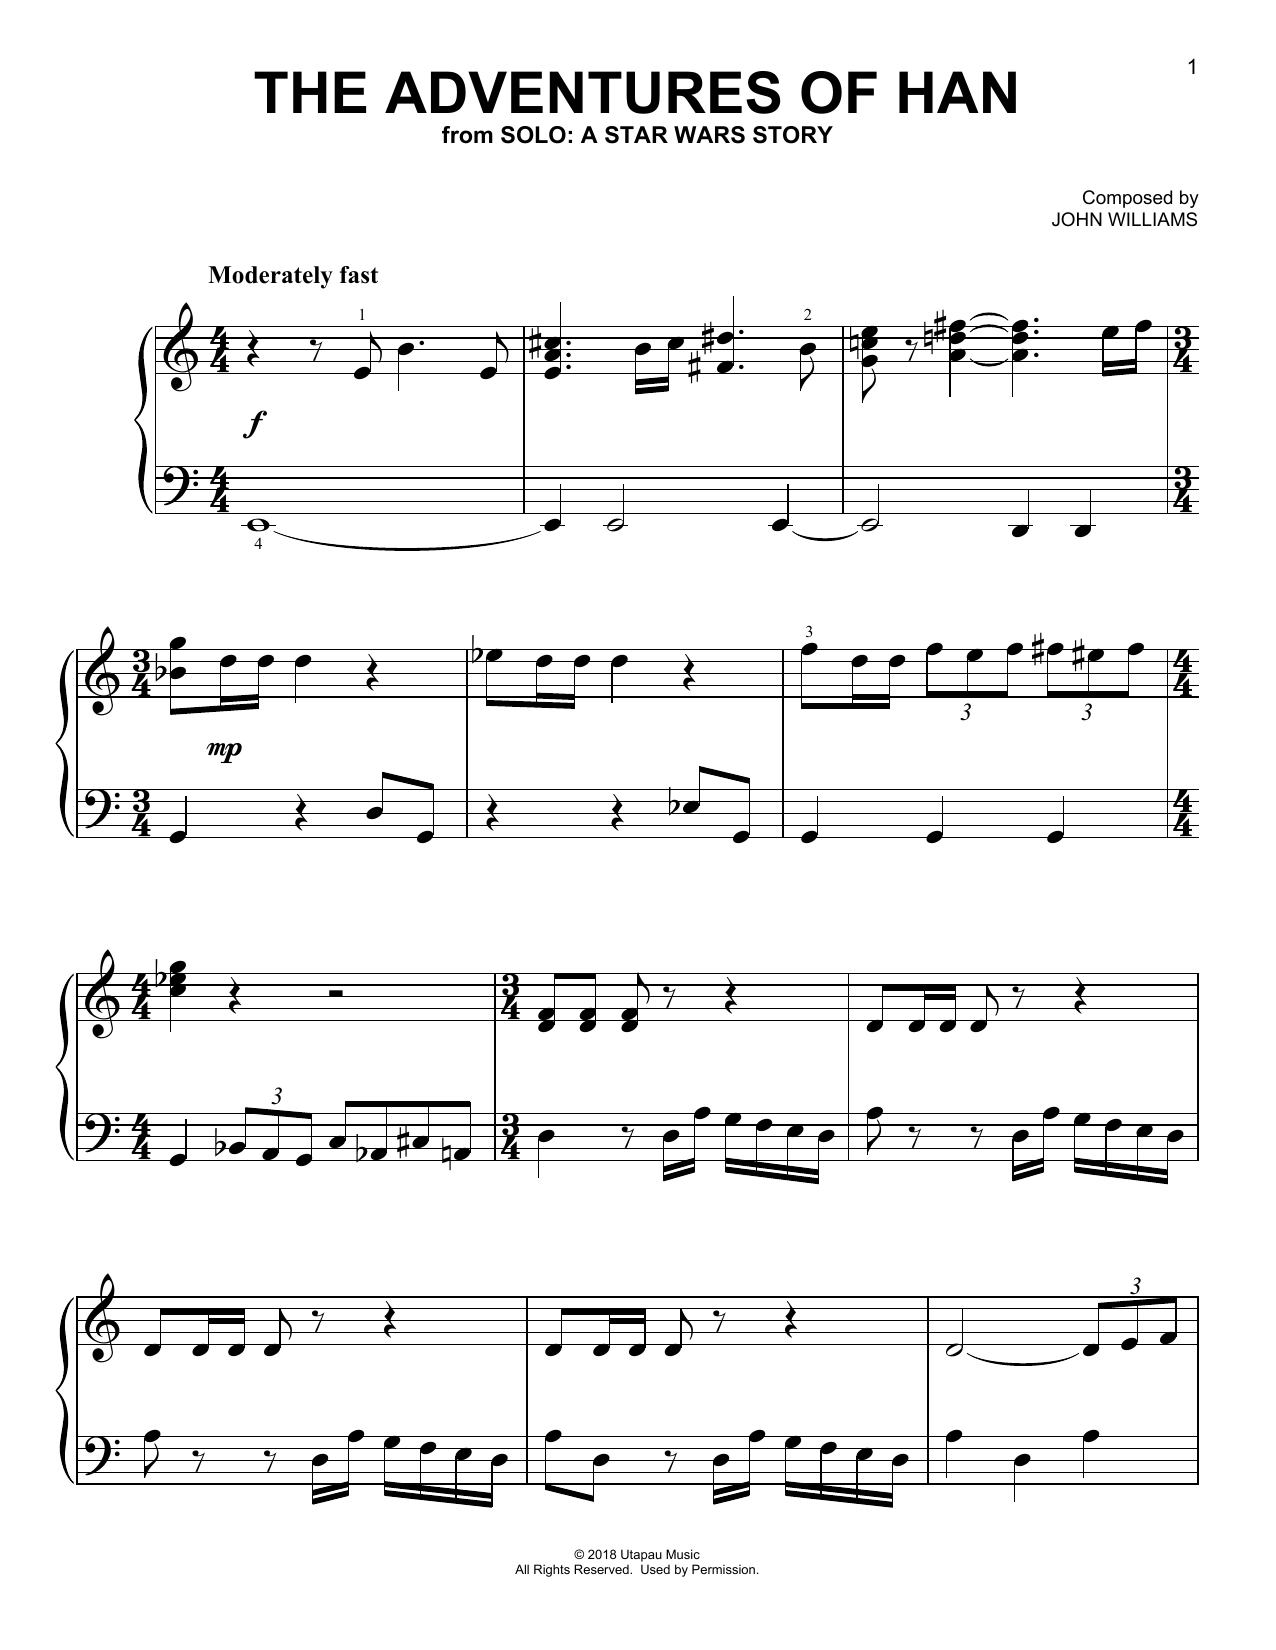 John Williams The Adventures Of Han (from Solo: A Star Wars Story) sheet music notes and chords. Download Printable PDF.